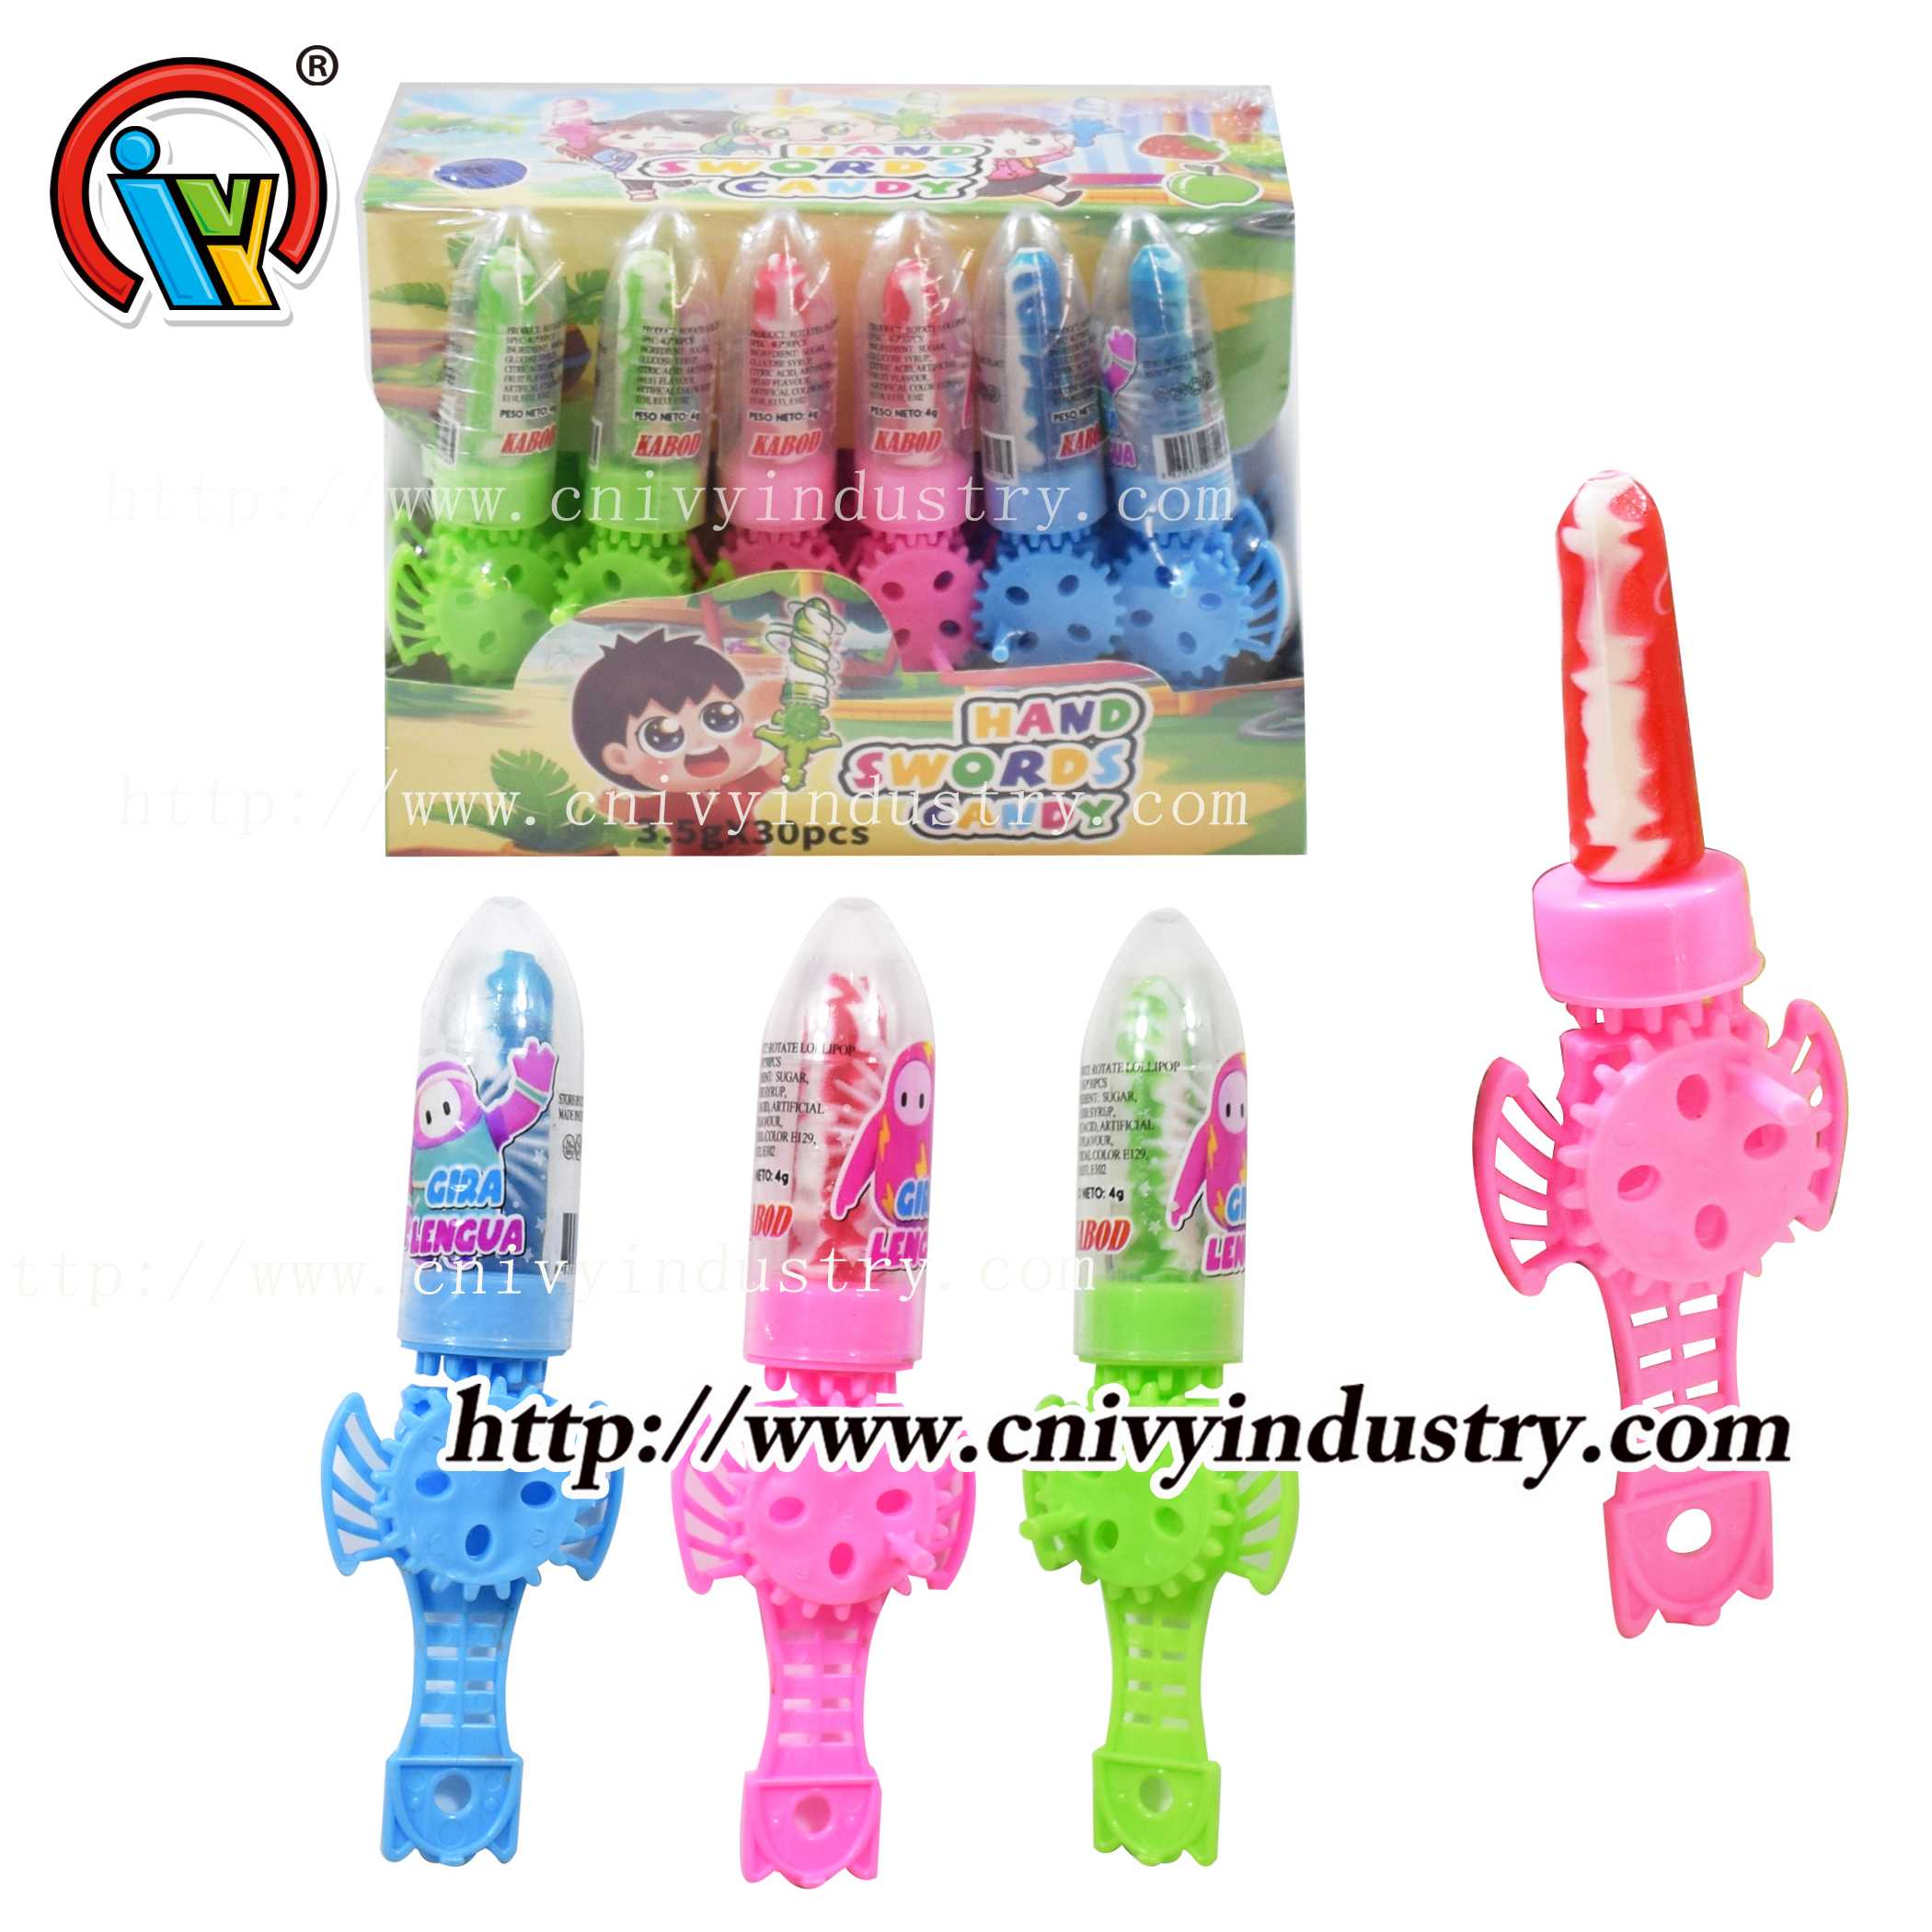 Hand rotating sword lollipop toy candy